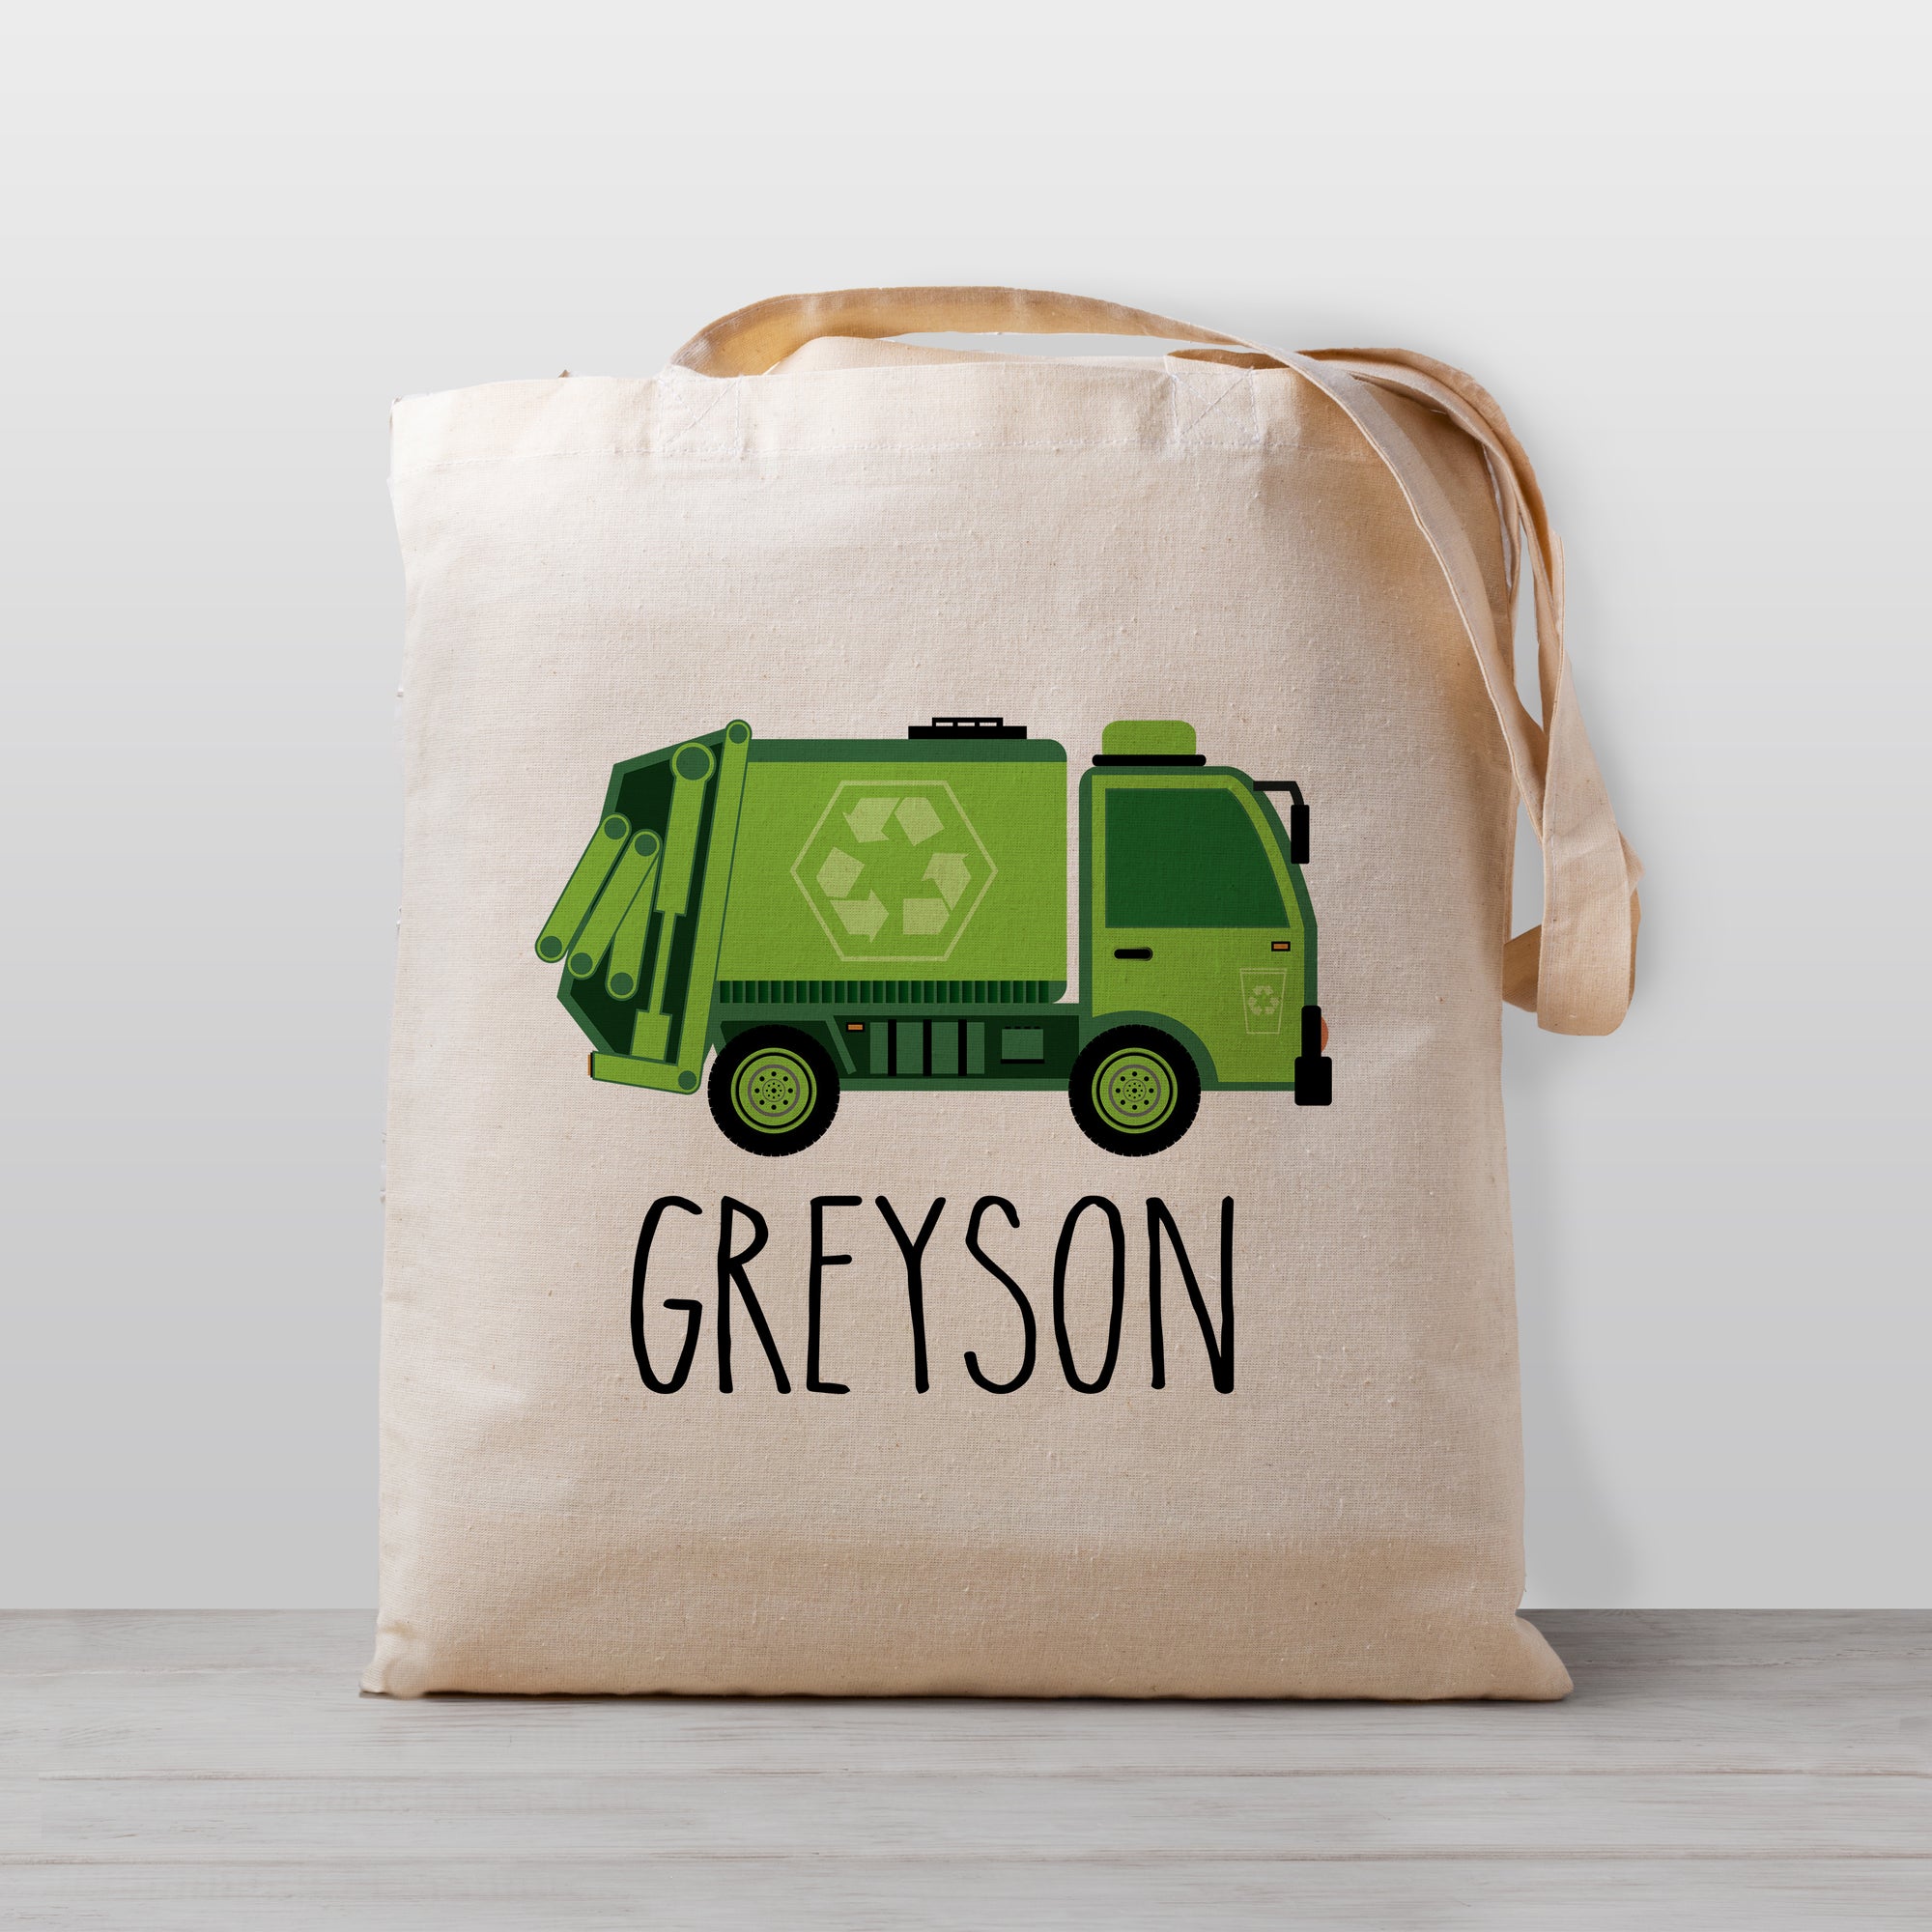 Personalized garbage and recycling truck tote bag, lightweight and easy for kids to carry, 100% natural cotton canvas